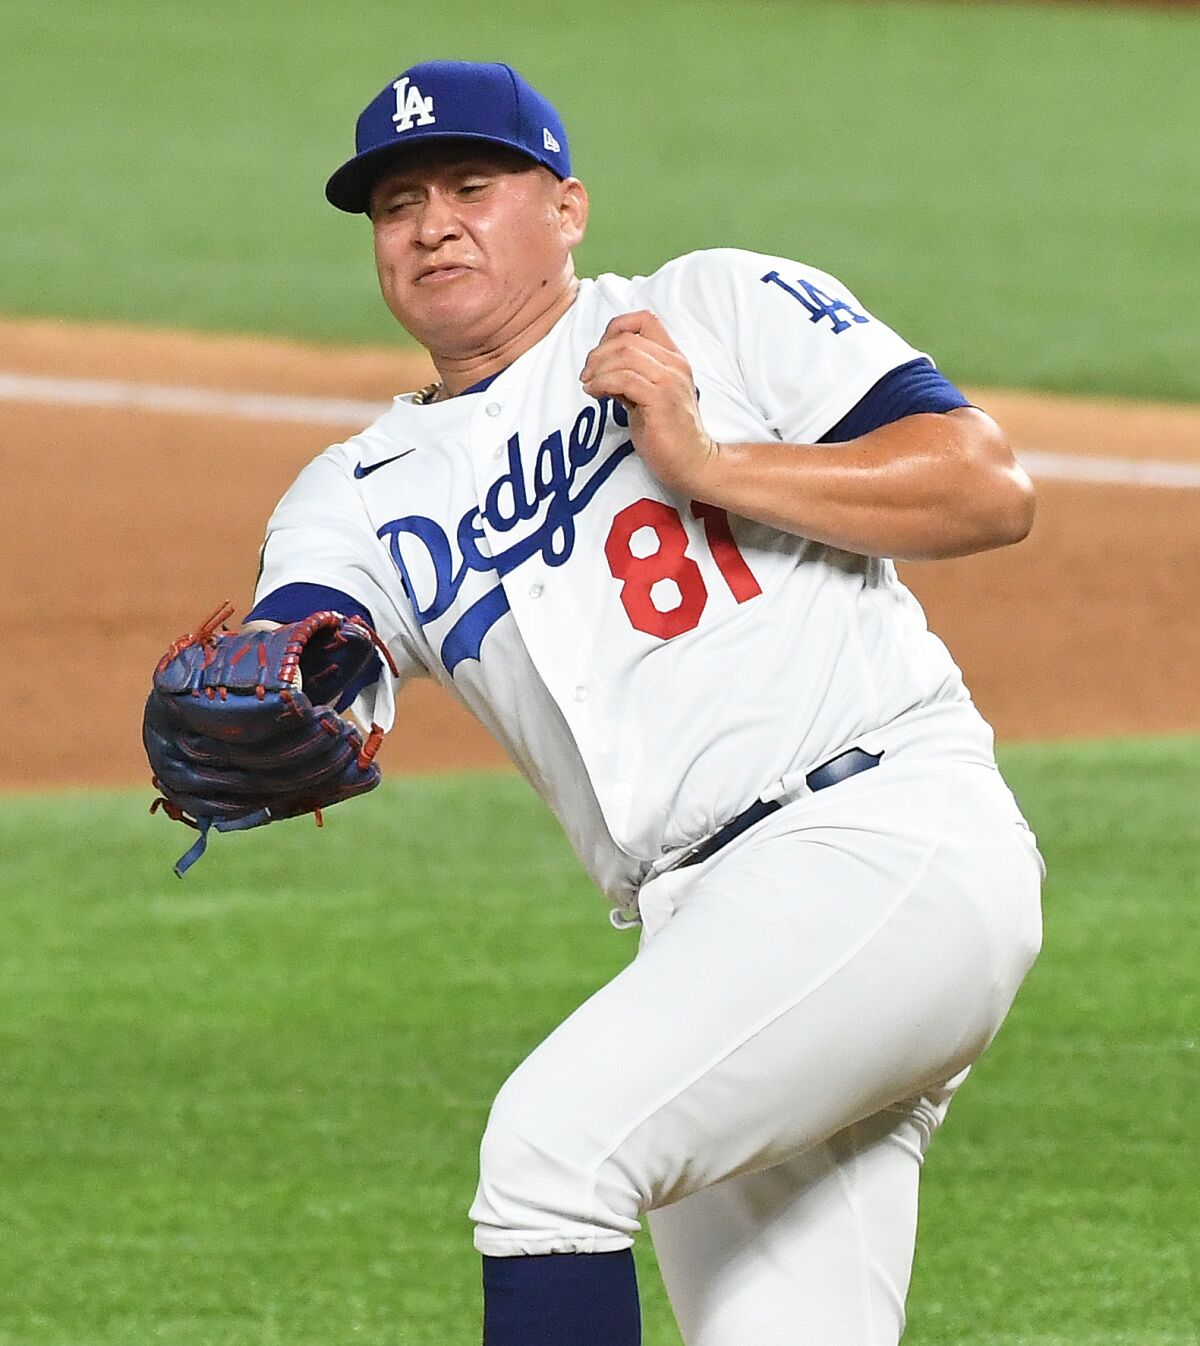 Dodgers reliever Victor González catches a line drive before throwing to second to complete a double play.